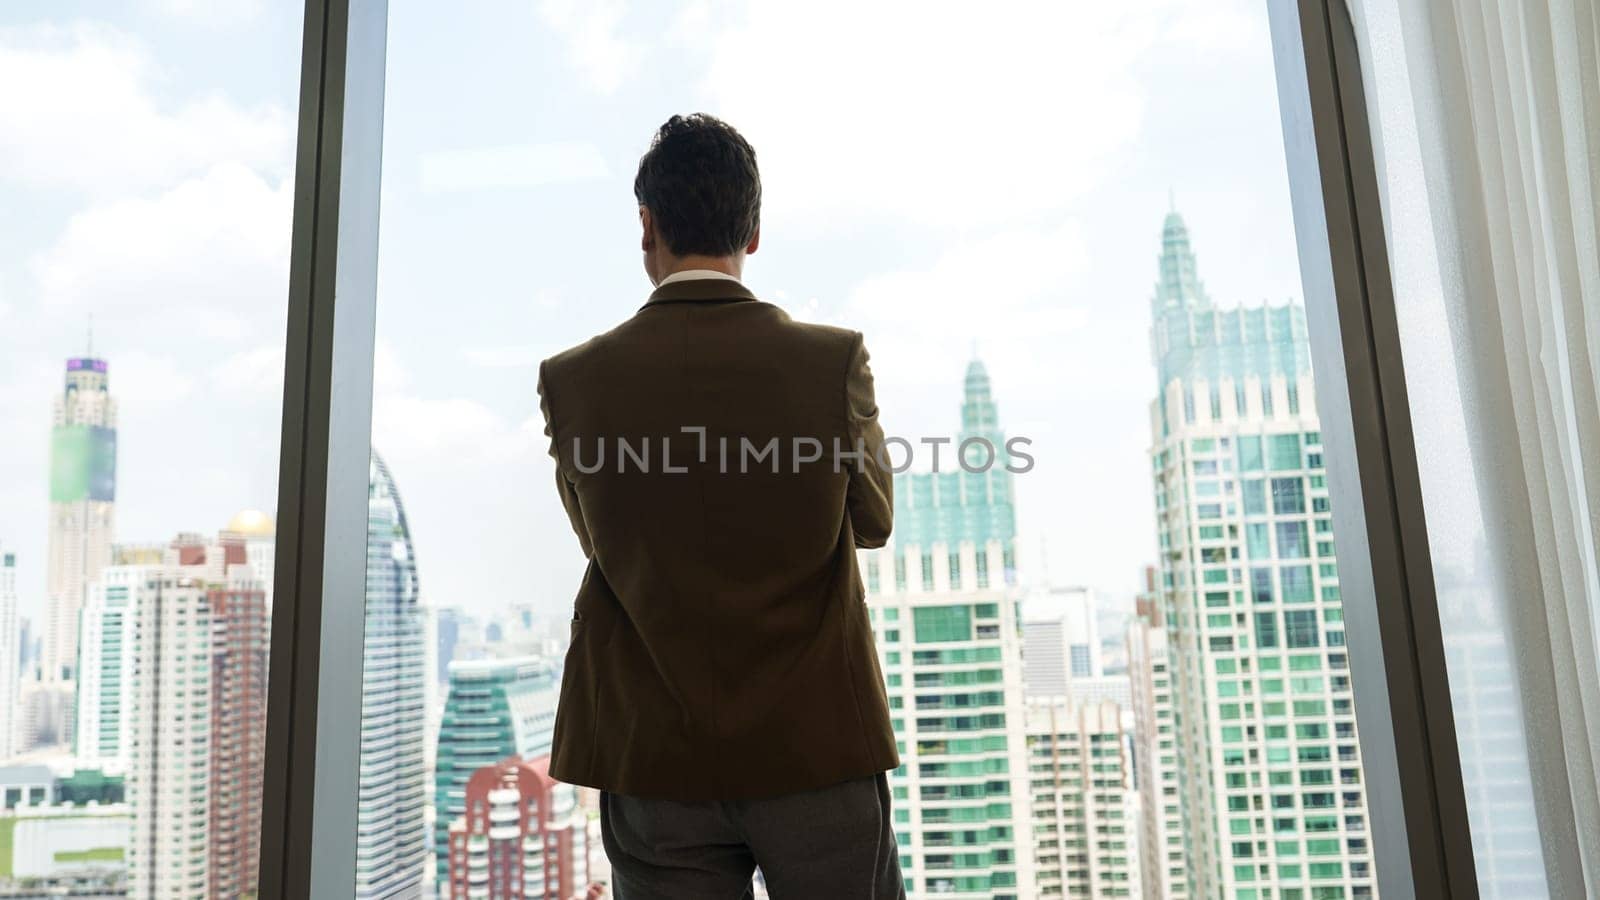 Back view ambitious businessman standing in ornamented office gazing out window to cityscape skyline. Determination and business ambition drive business career toward to bright future